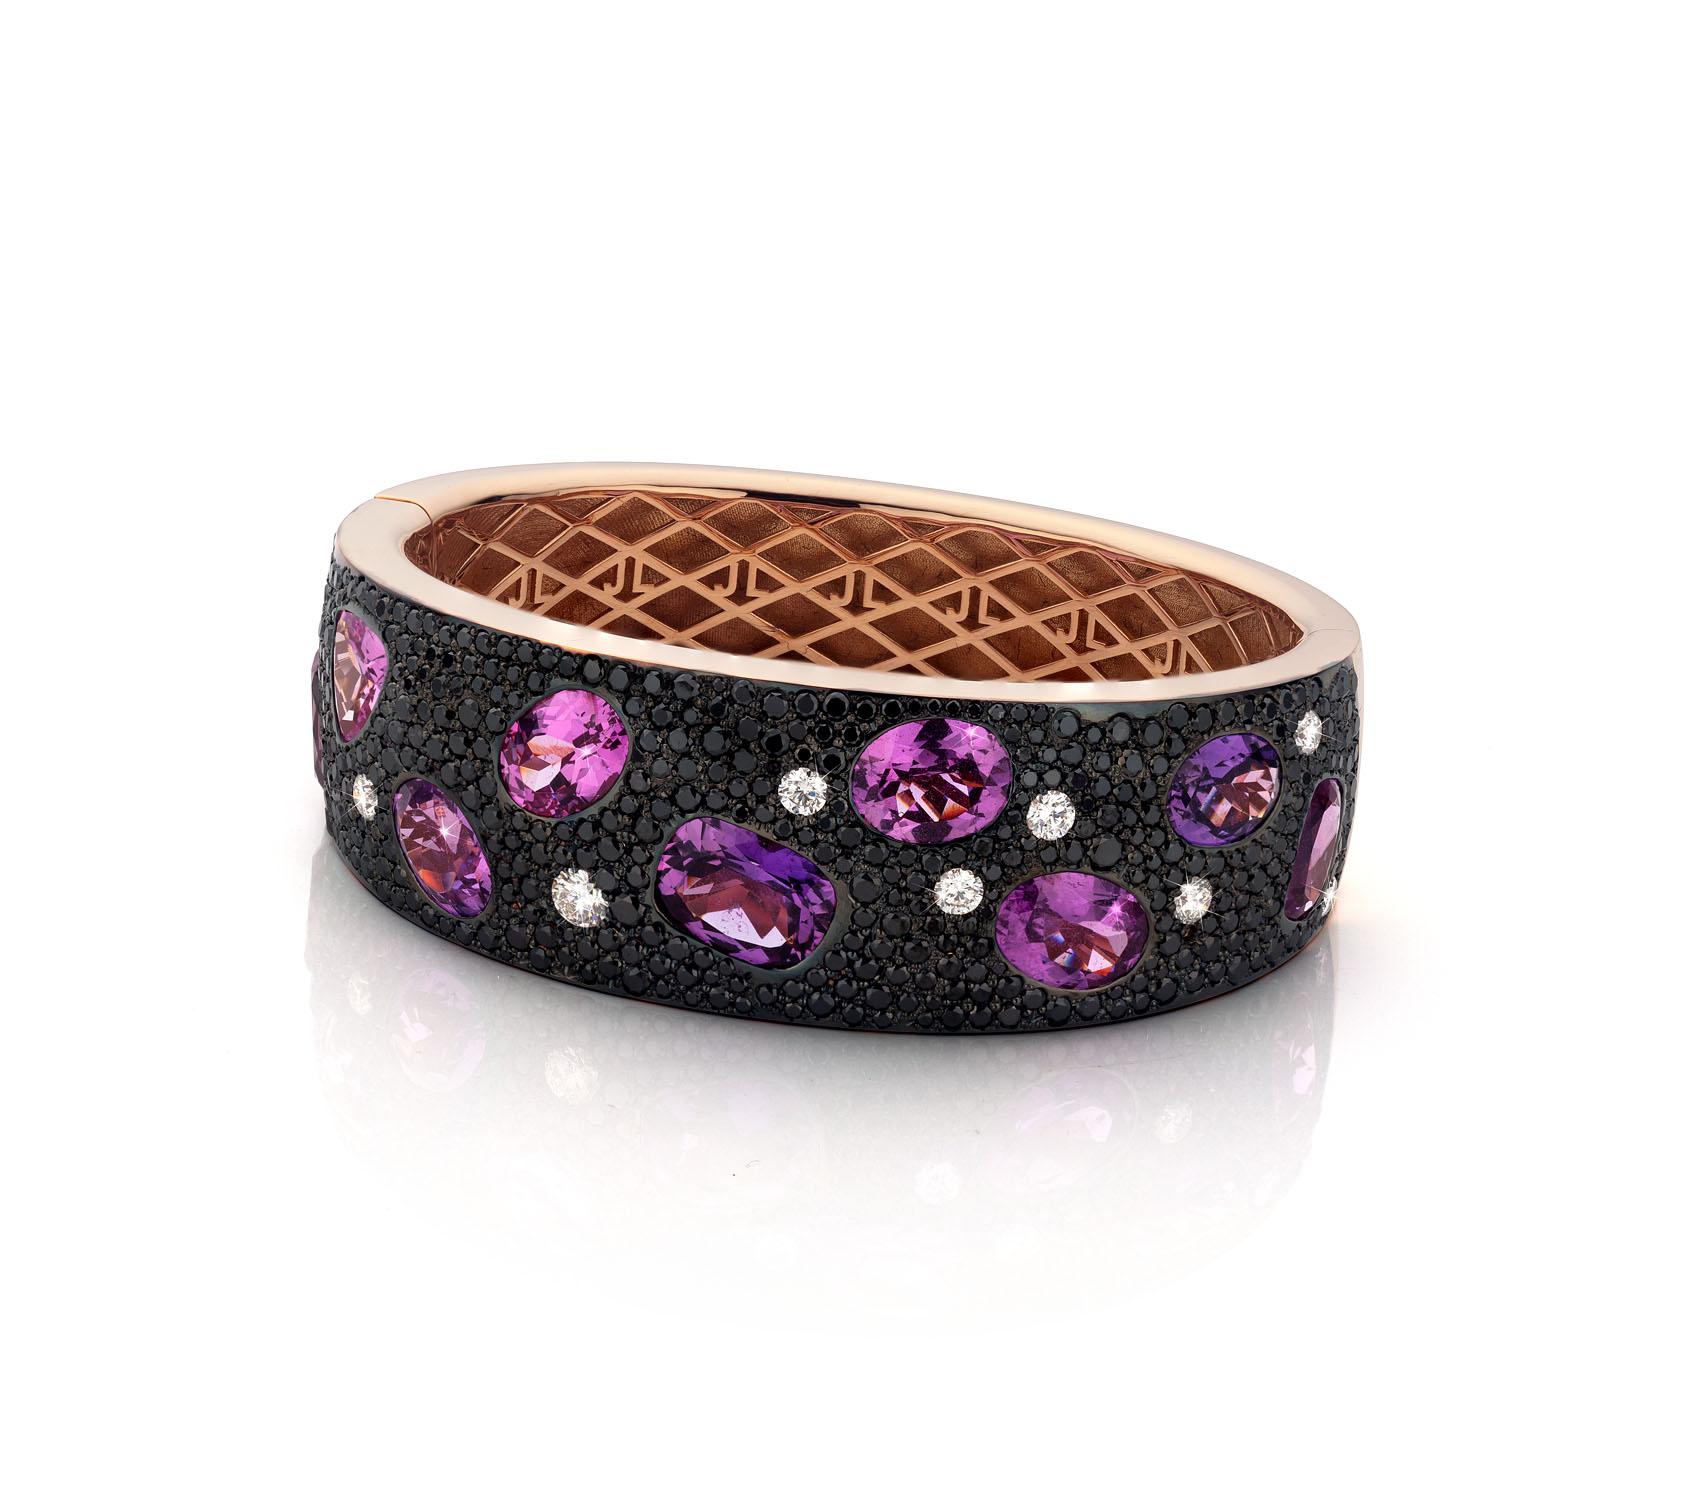 18 Karat Rose gold Bracelet featuring 23.04 carat Pink Sapphire stones.

Set with hand-engraved 8,29 carat Black Diamonds and 1,03 carat White Diamonds.

This is a one of a kind design made by Jochen Leën to showcase two of the world's rarest types